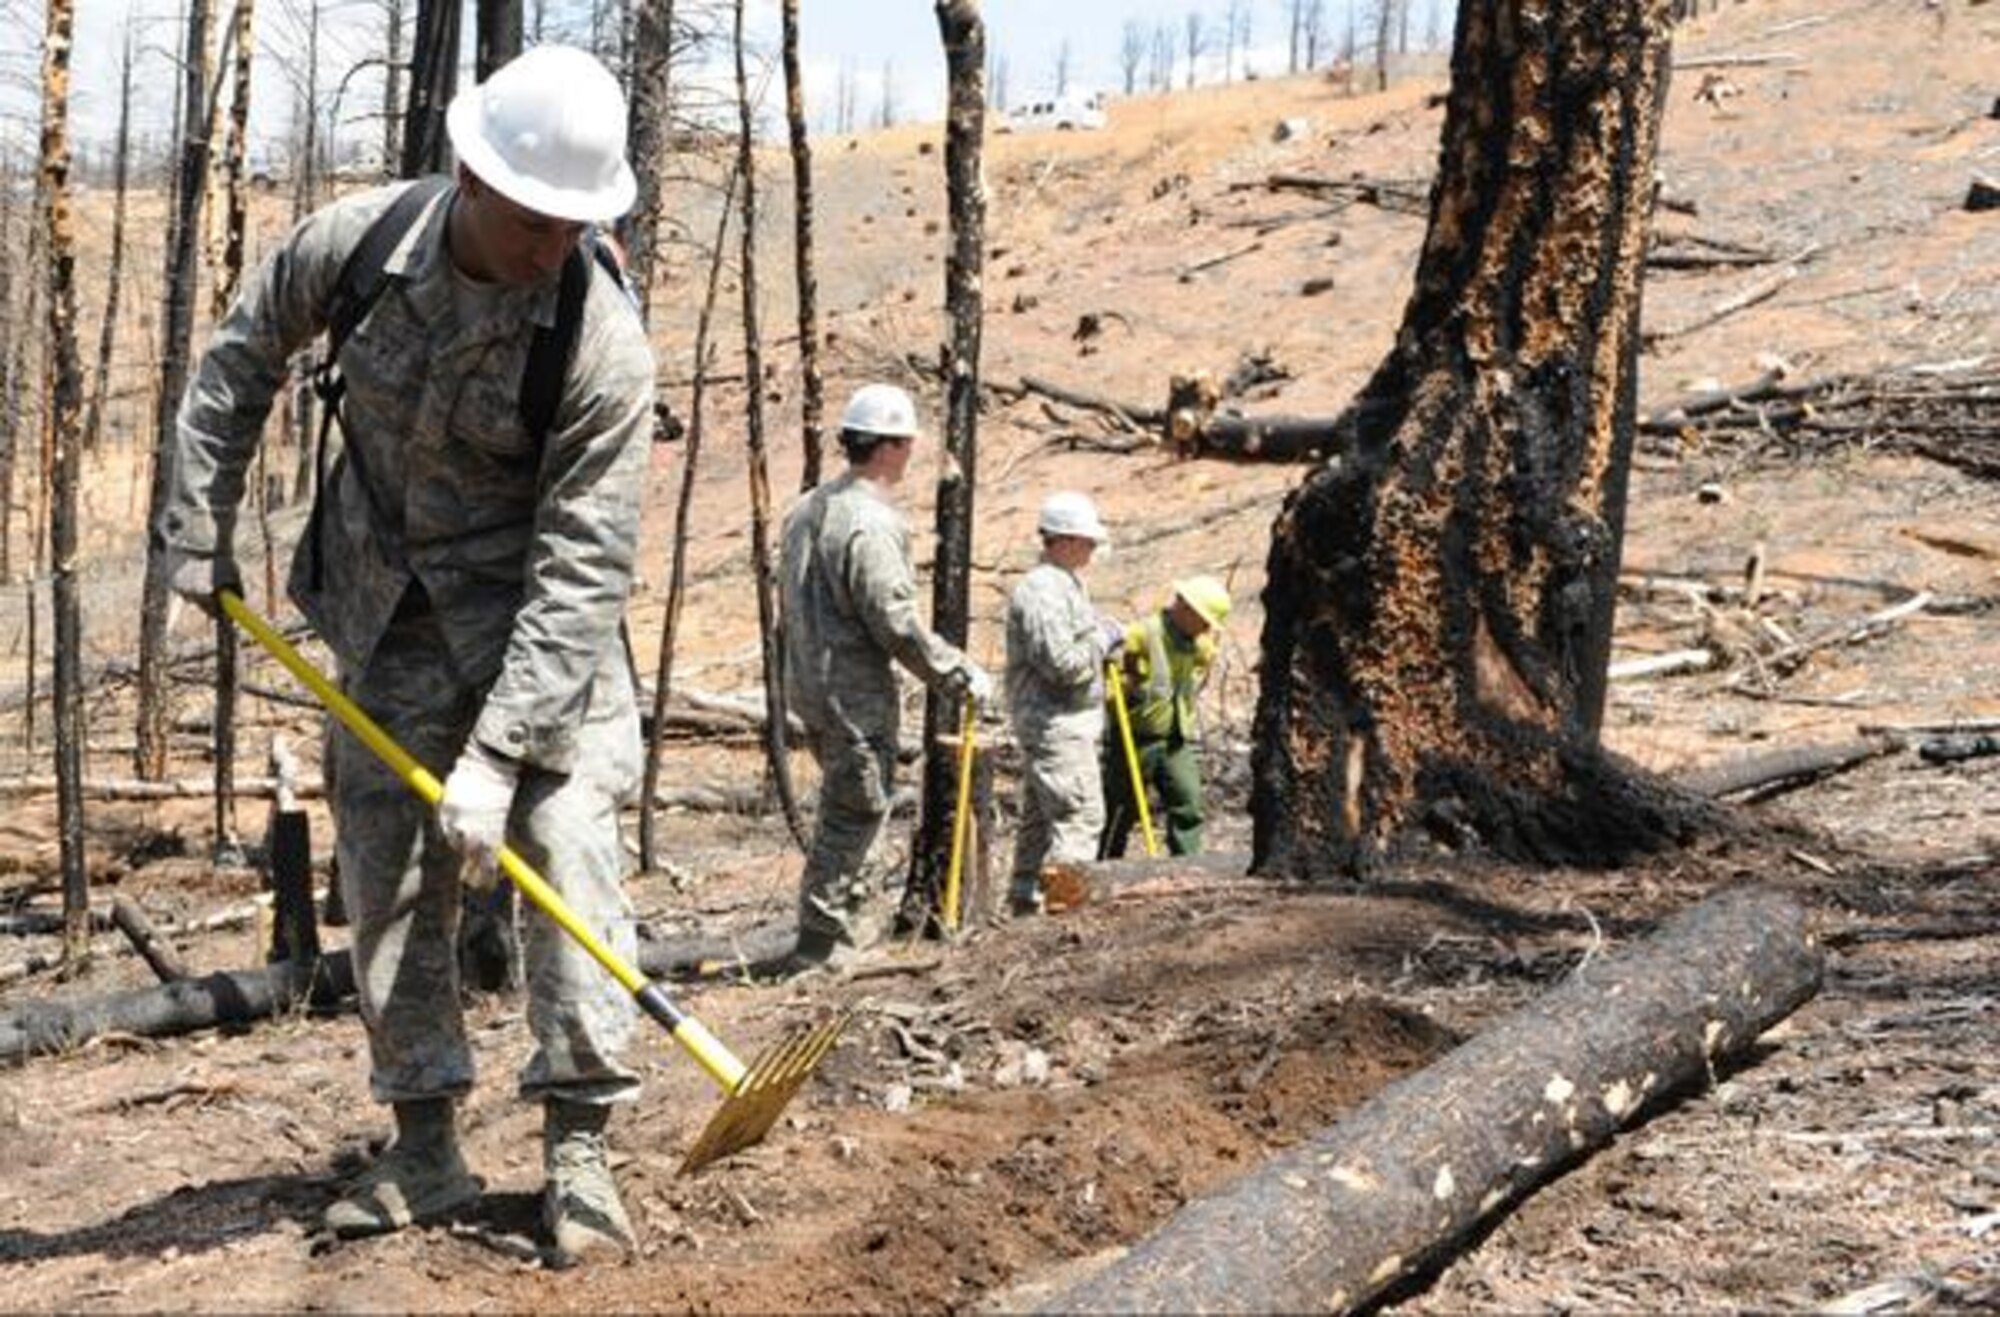 Cadet 1st Class Broam Hart helps move logs in order to prevent flooding after the Waldo Canyon fire in June, 2013. Hart participates in a variety of volunteer work, in addition to playing for the Academy football team and his academics. (Courtesy photo)